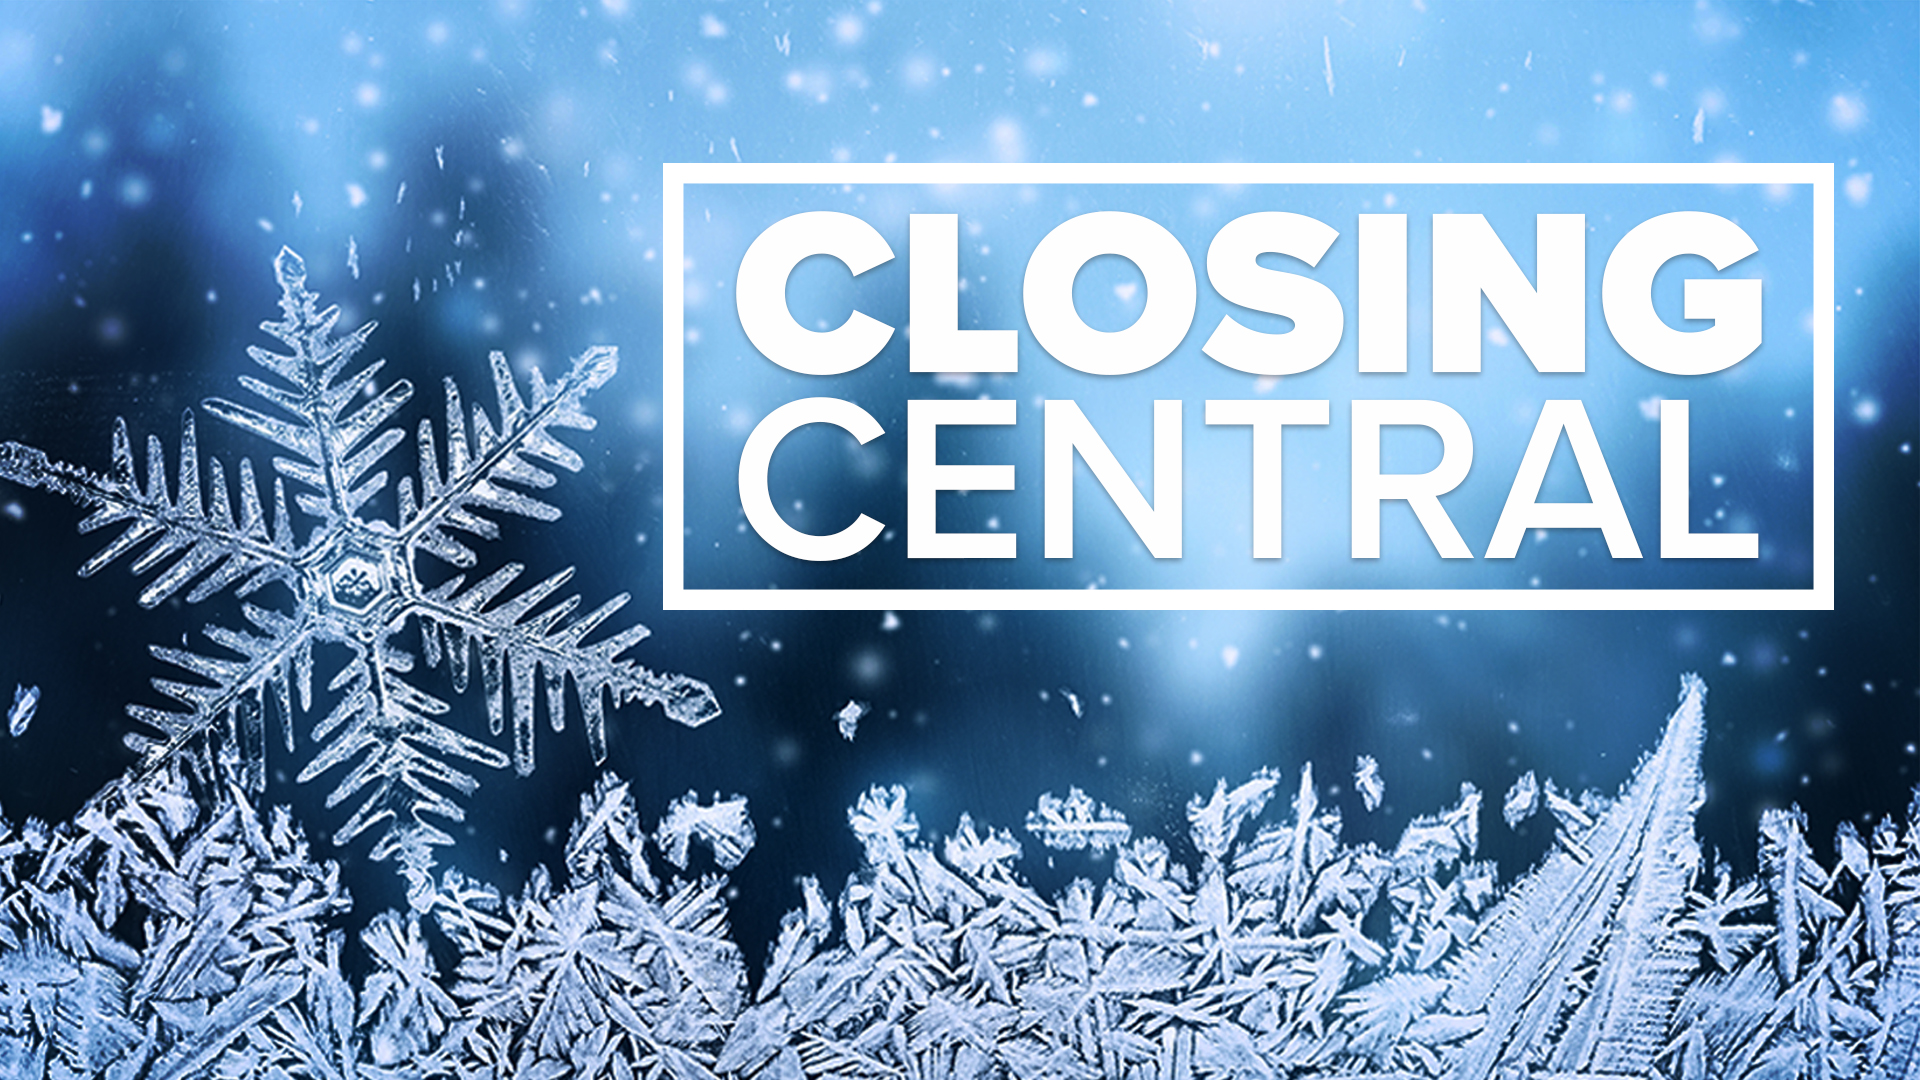 Get the latest closings and cancellations on Closing Central